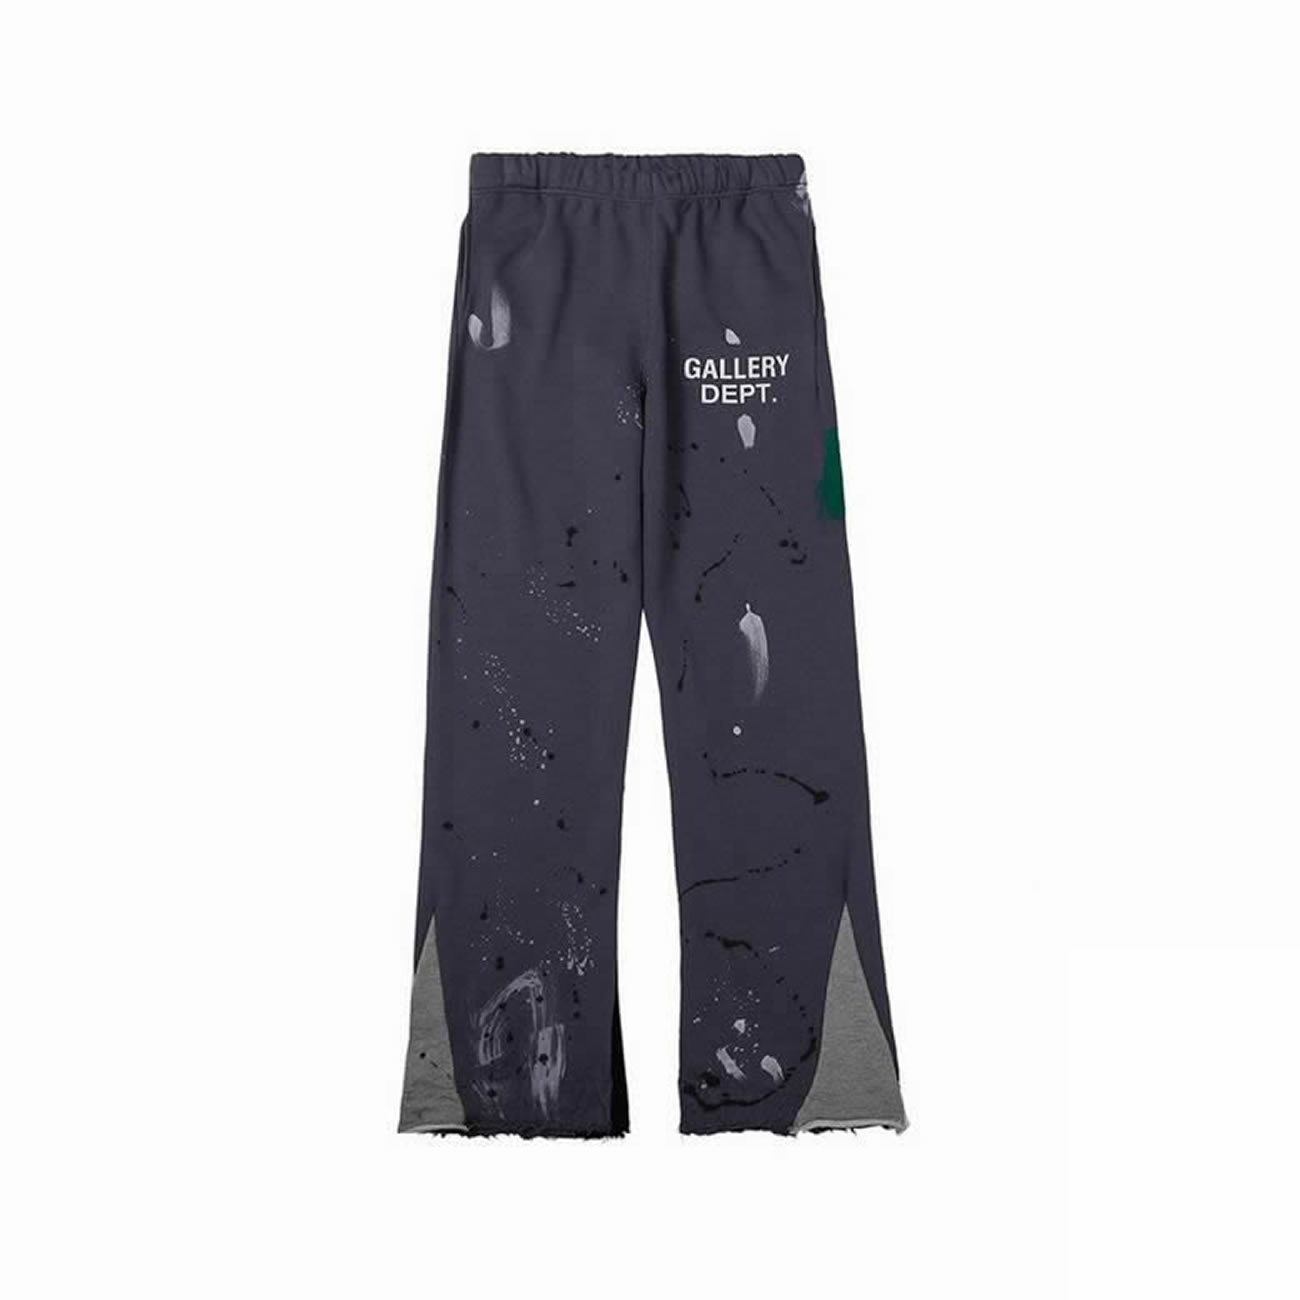 Gallery Dept. Painted Flare Sweat Pants Washed Black Navy Orange Grey SS21